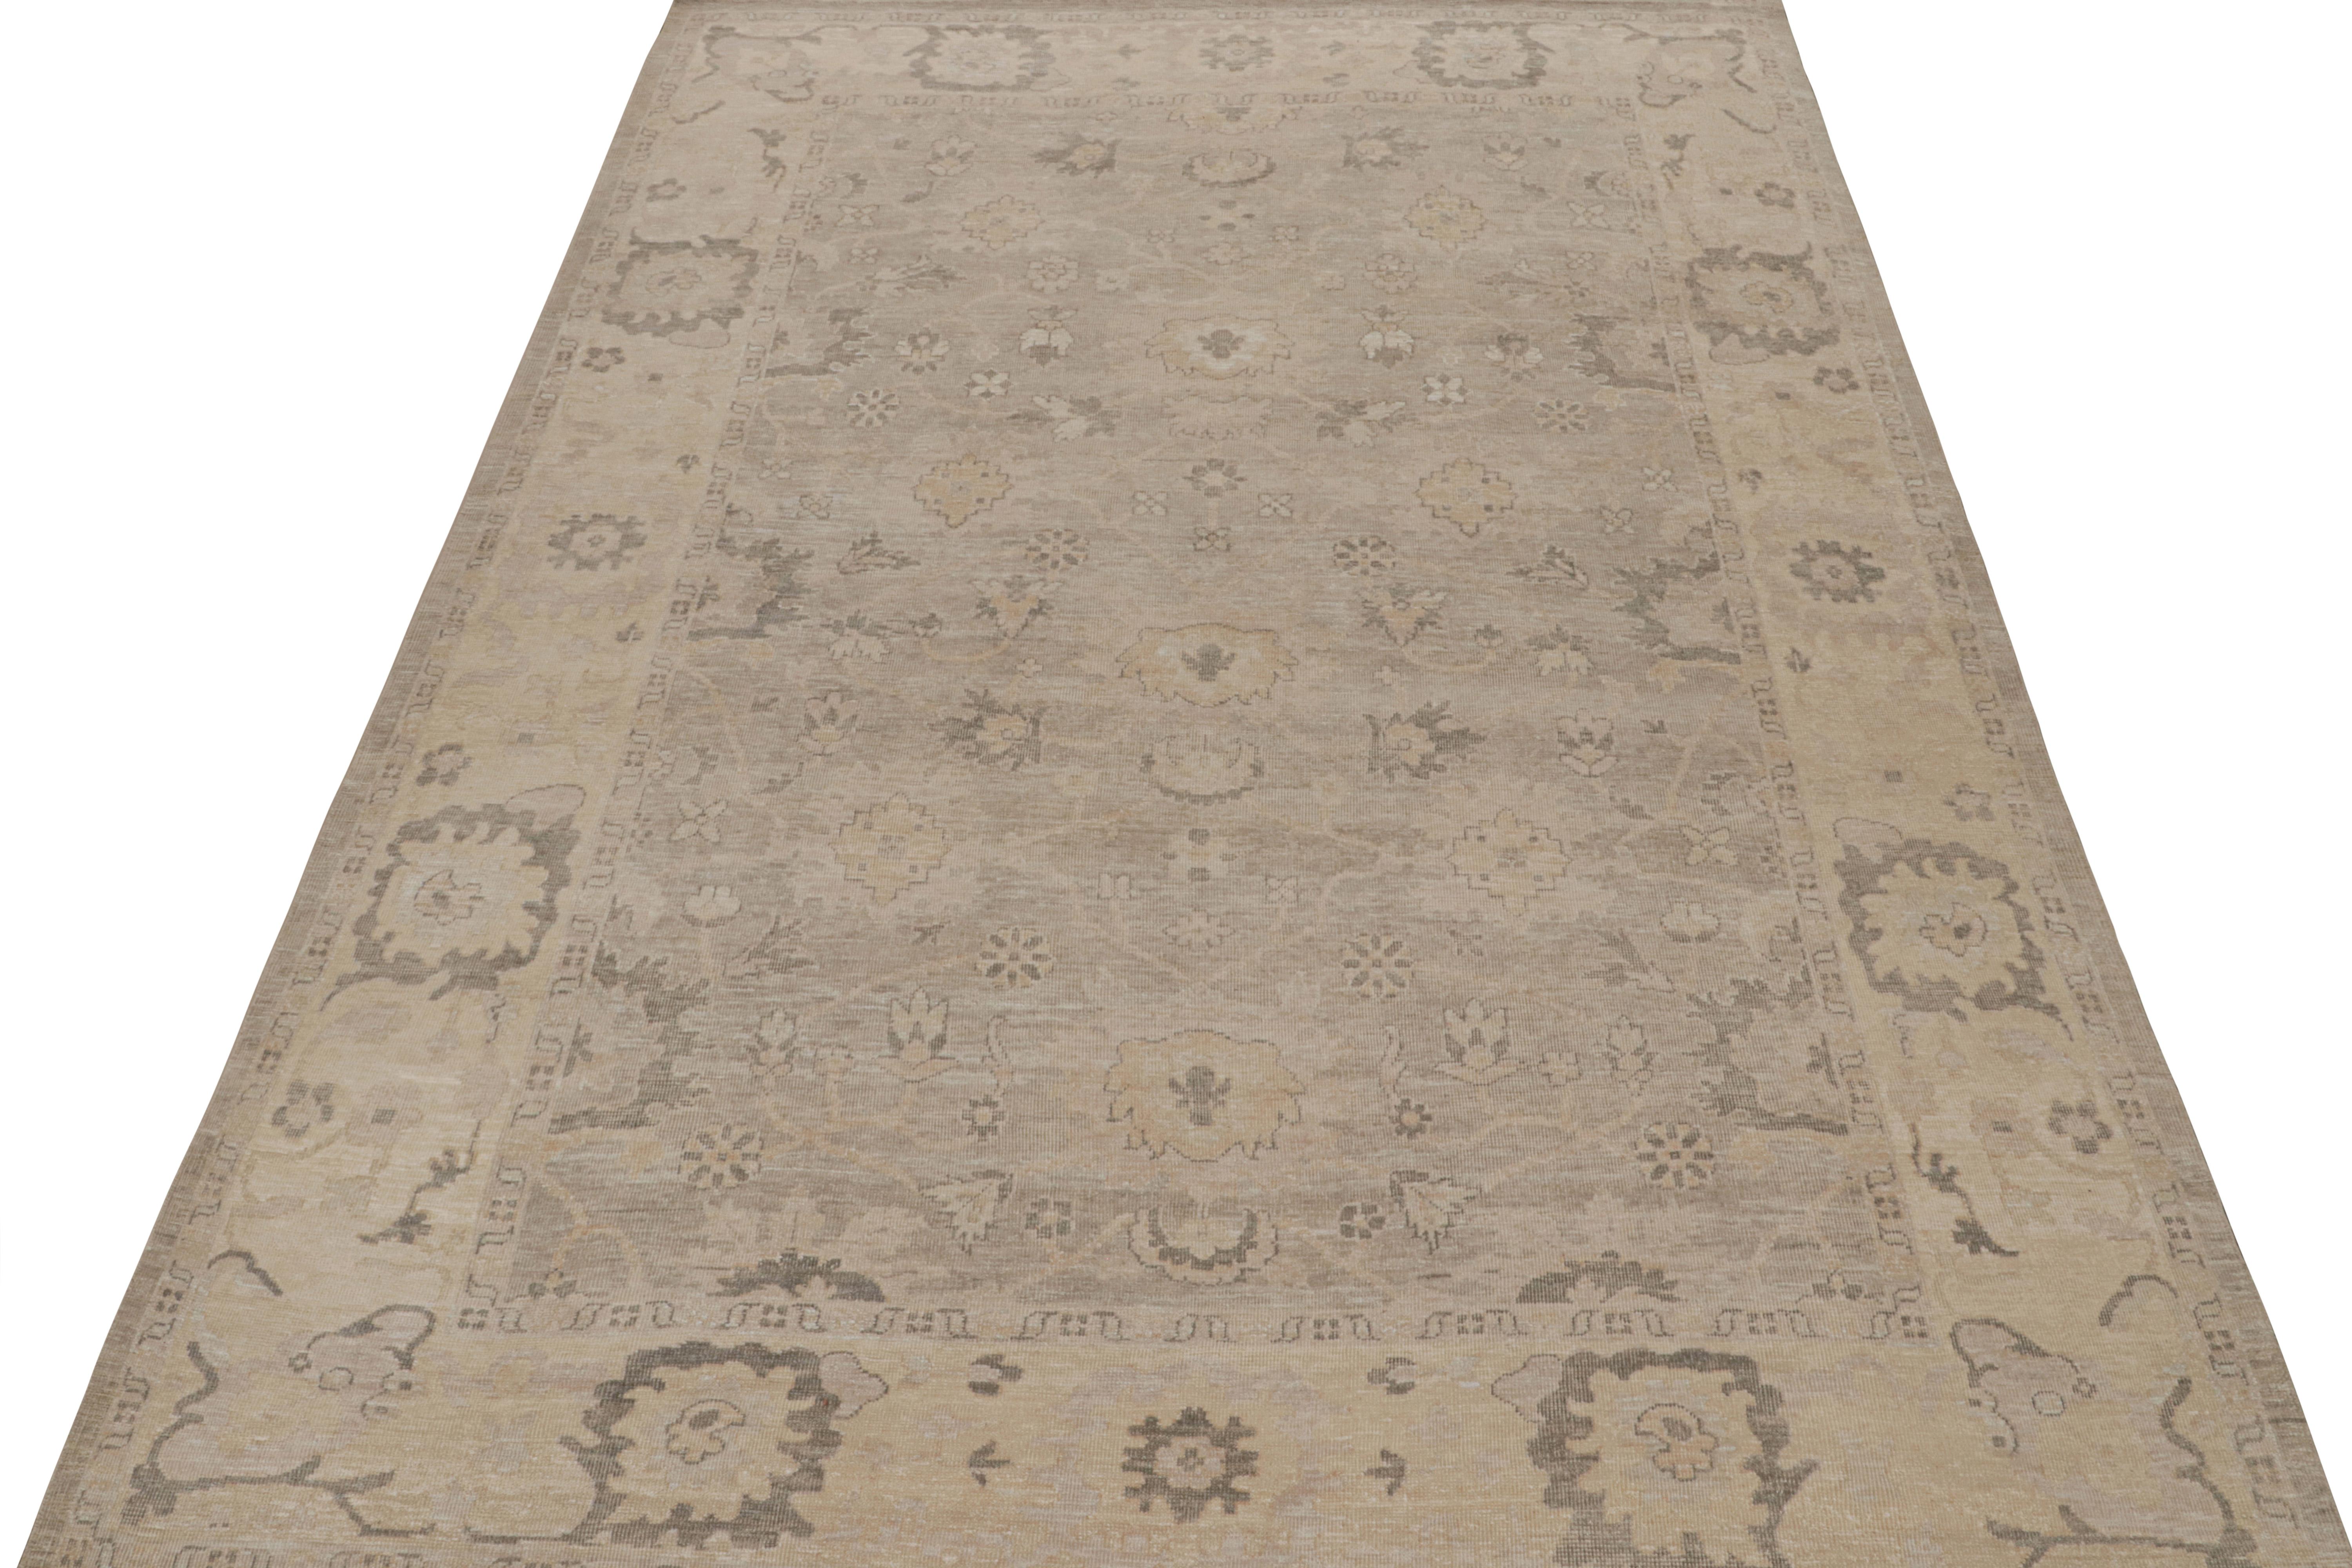 Indian Rug & Kilim’s Oushak Style Rug in Gray & Beige Floral Patterns For Sale